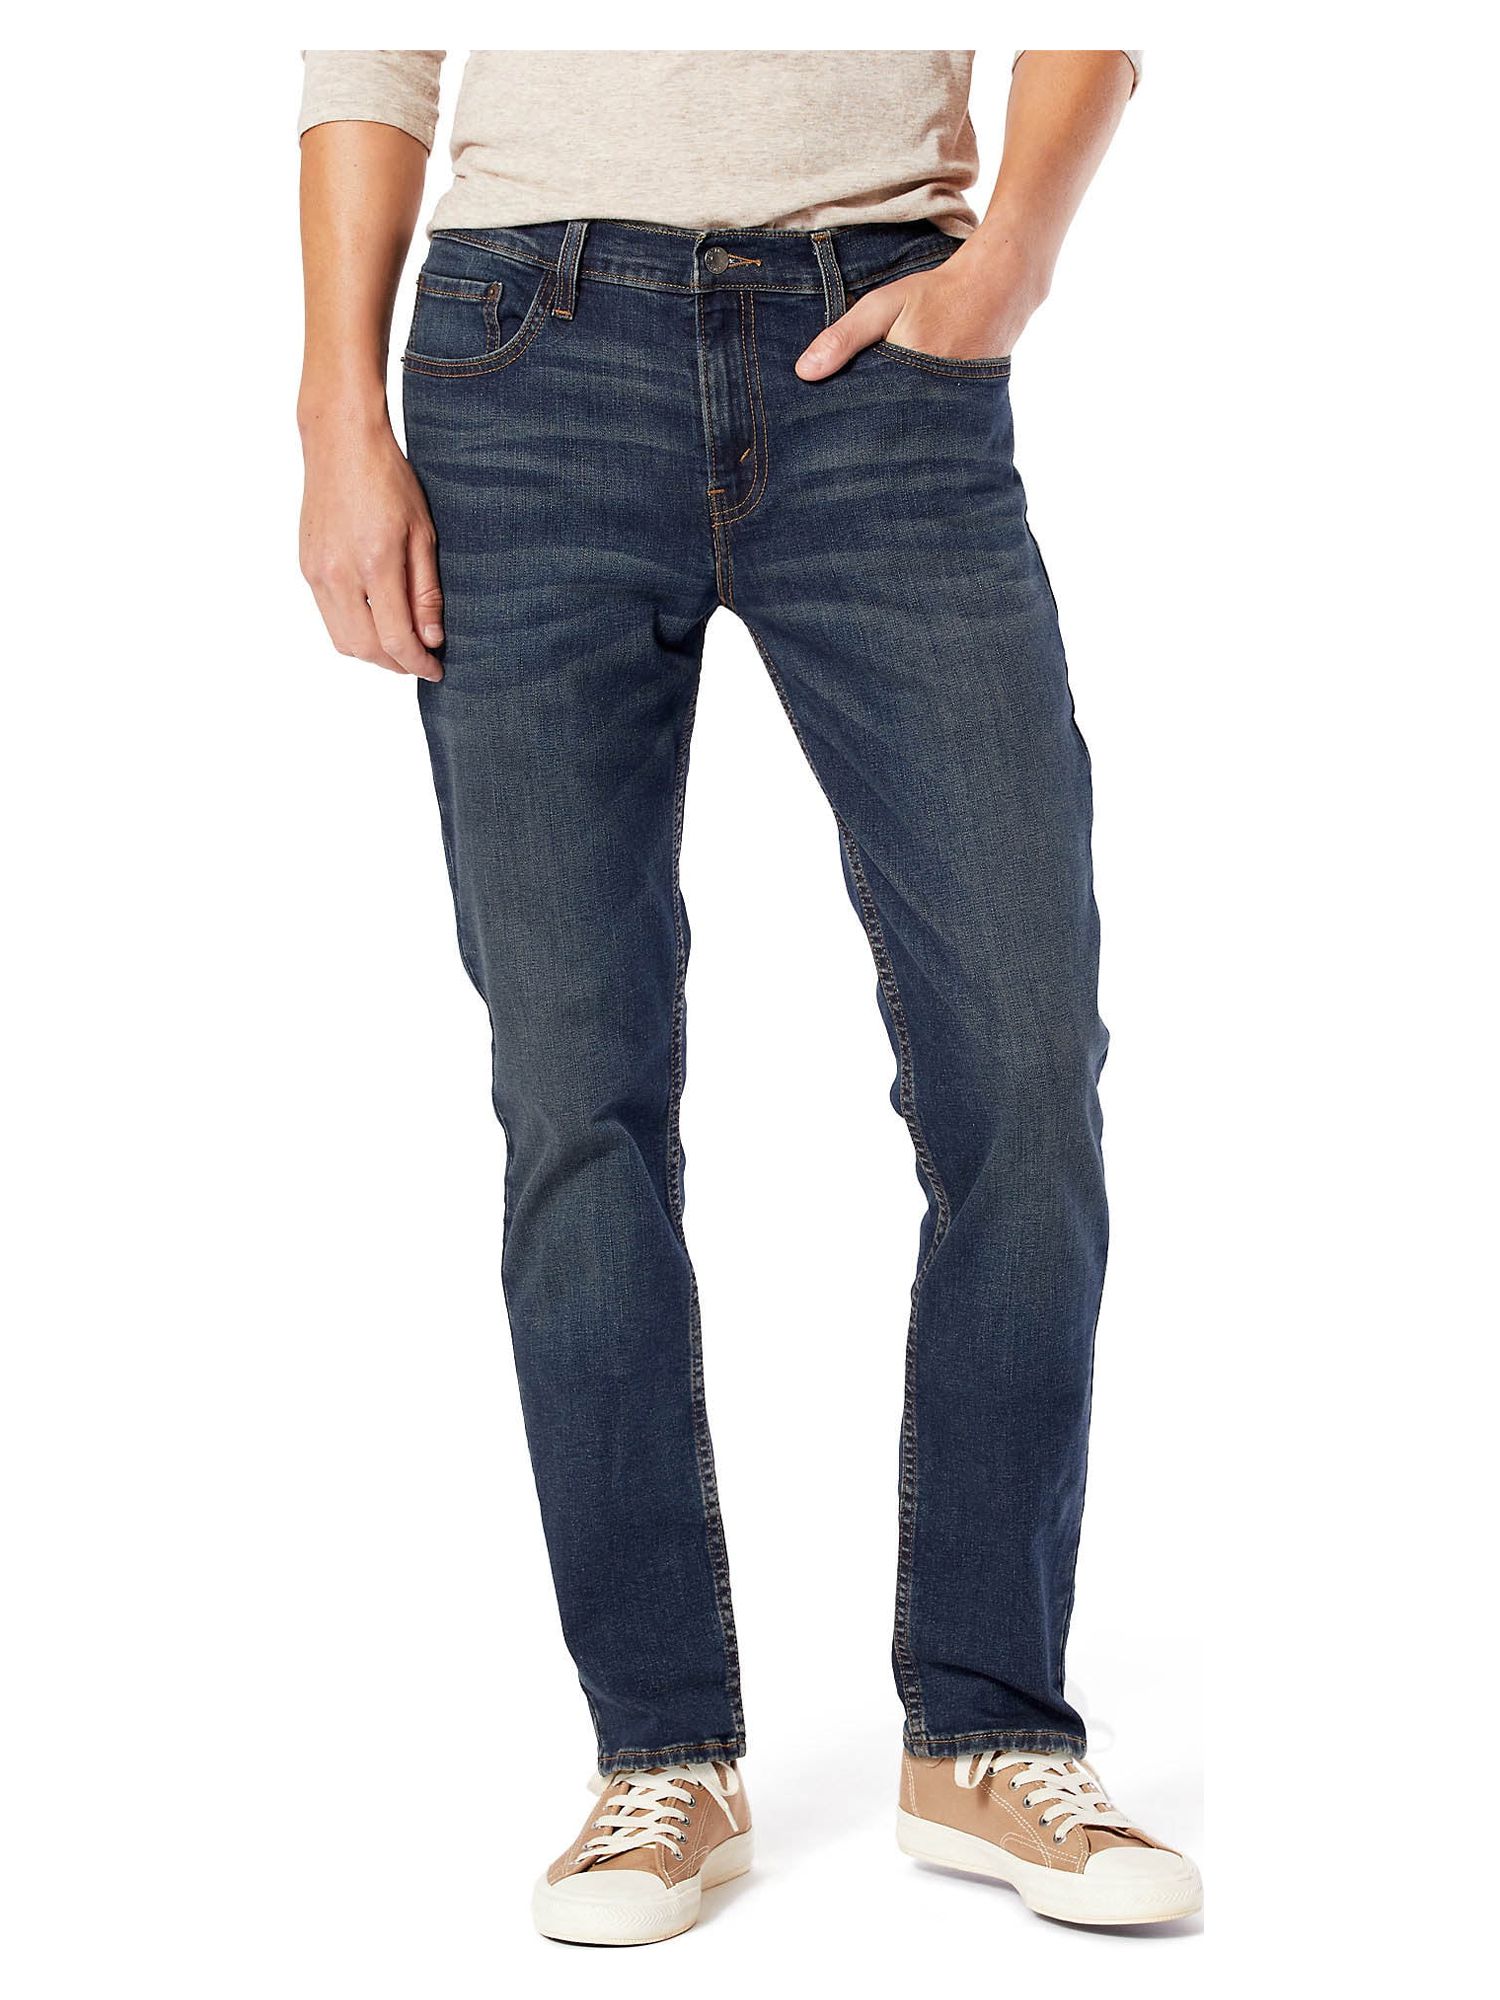 Signature by Levi Strauss & Co. Men's and Big Men's Slim Fit Jeans - image 1 of 5